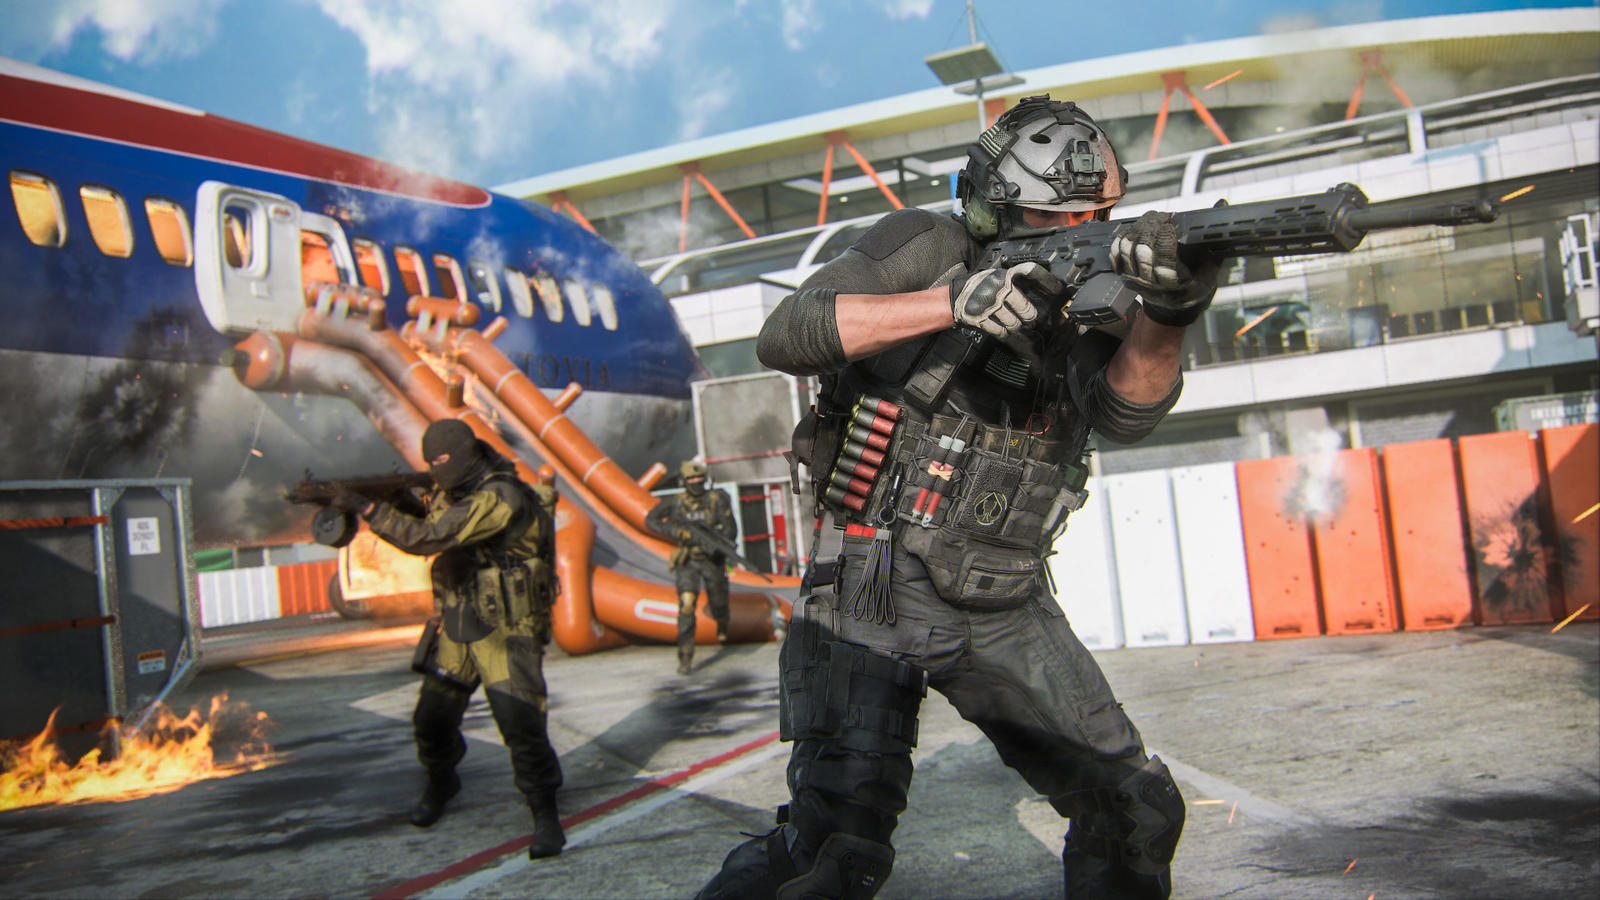 Call of Duty Warzone Mobile game pre-registration spawns in